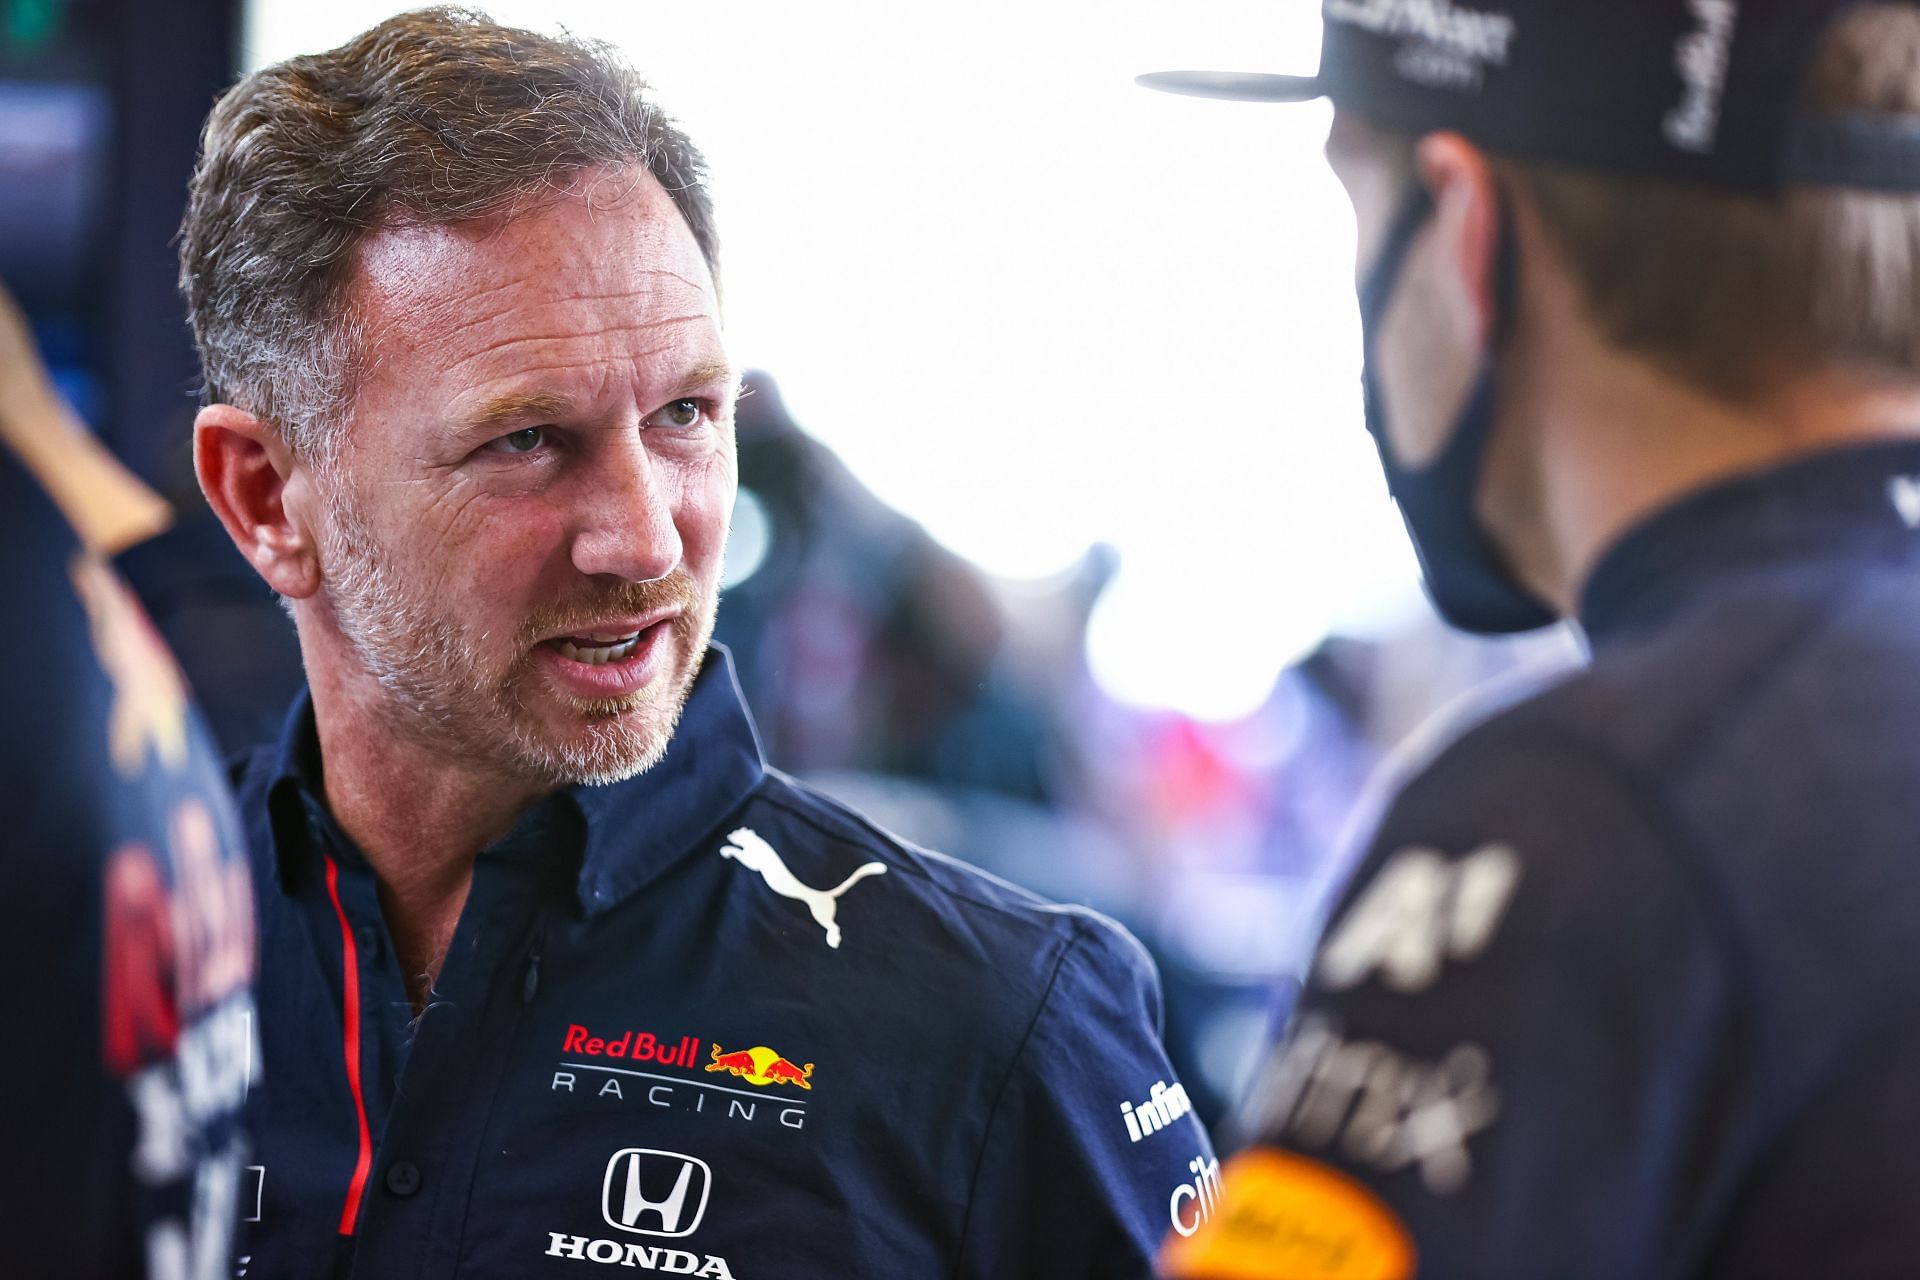 F1 Grand Prix of Abu Dhabi - Christian Horner and Max Verstappen ahead of FP1.